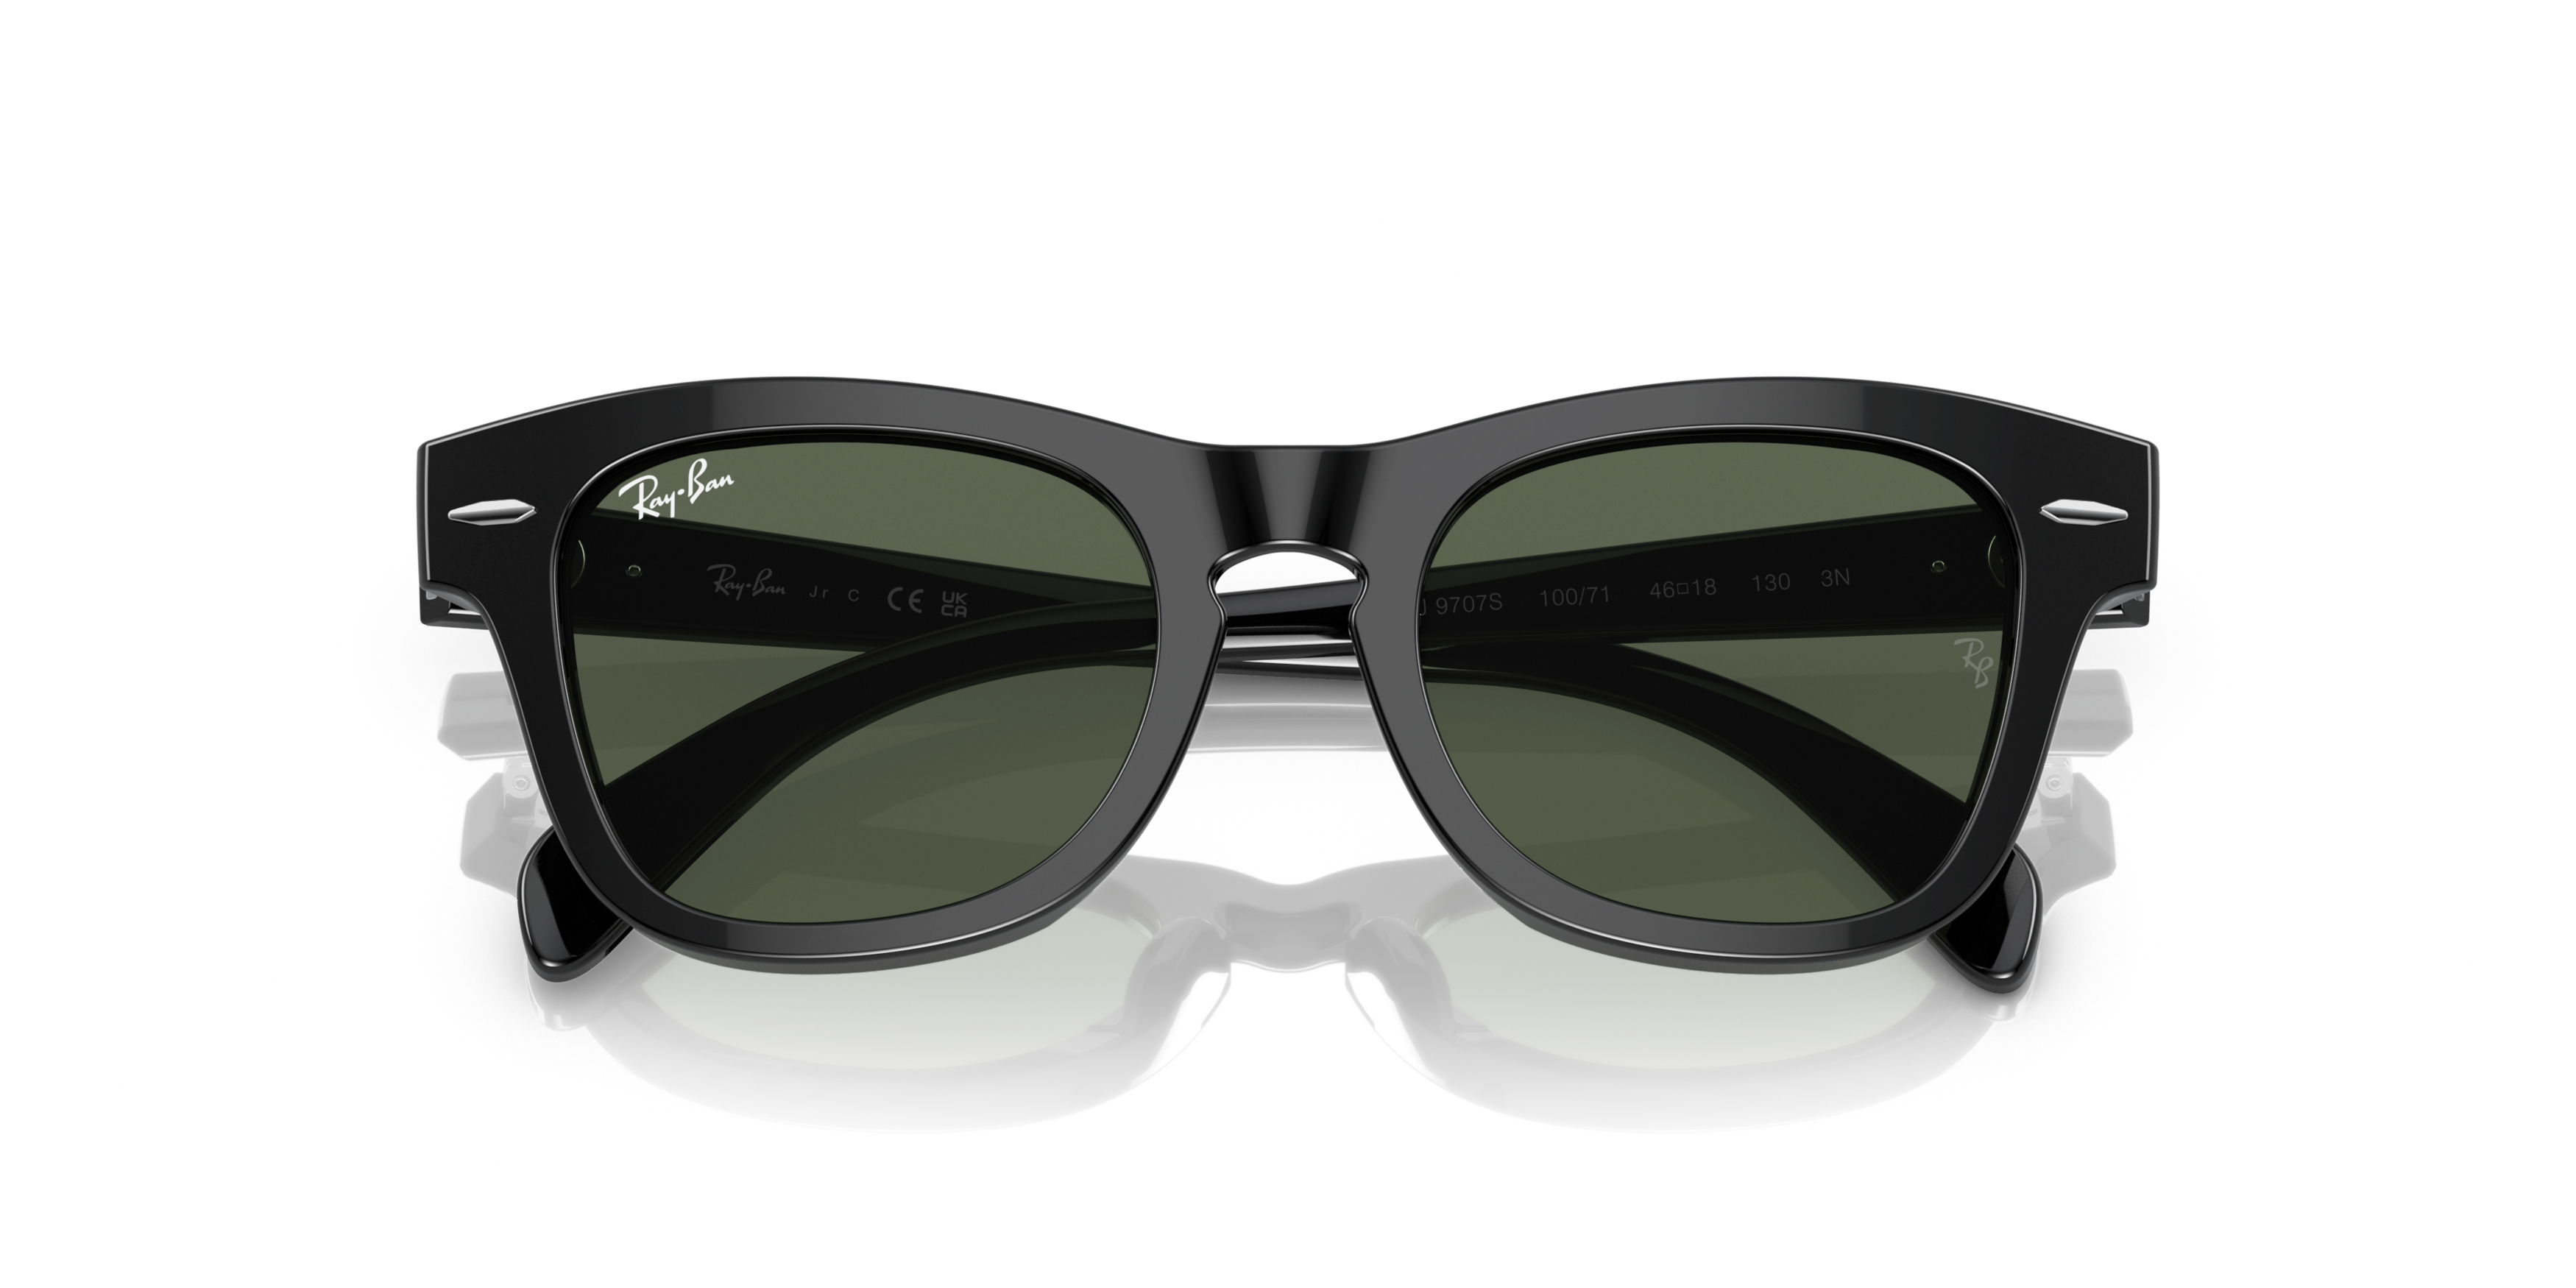 [products.image.folded] Ray-Ban Junior 0RJ9707S 100/71